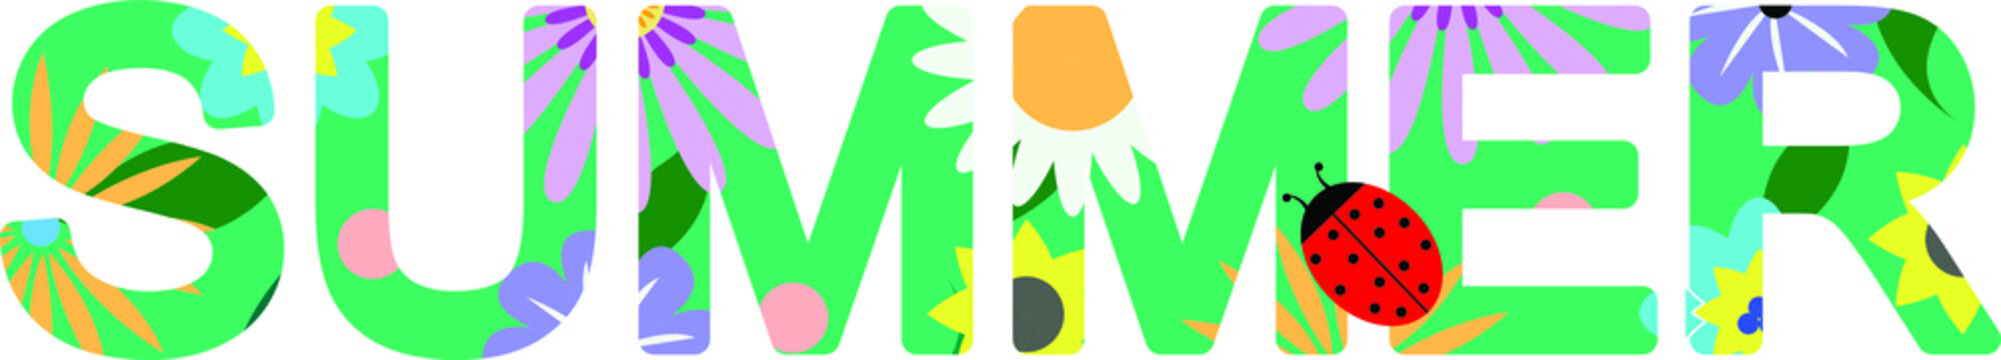 Vector graphics - the word summer and letters with bright colors and a green background and a cowbird. The concept season.